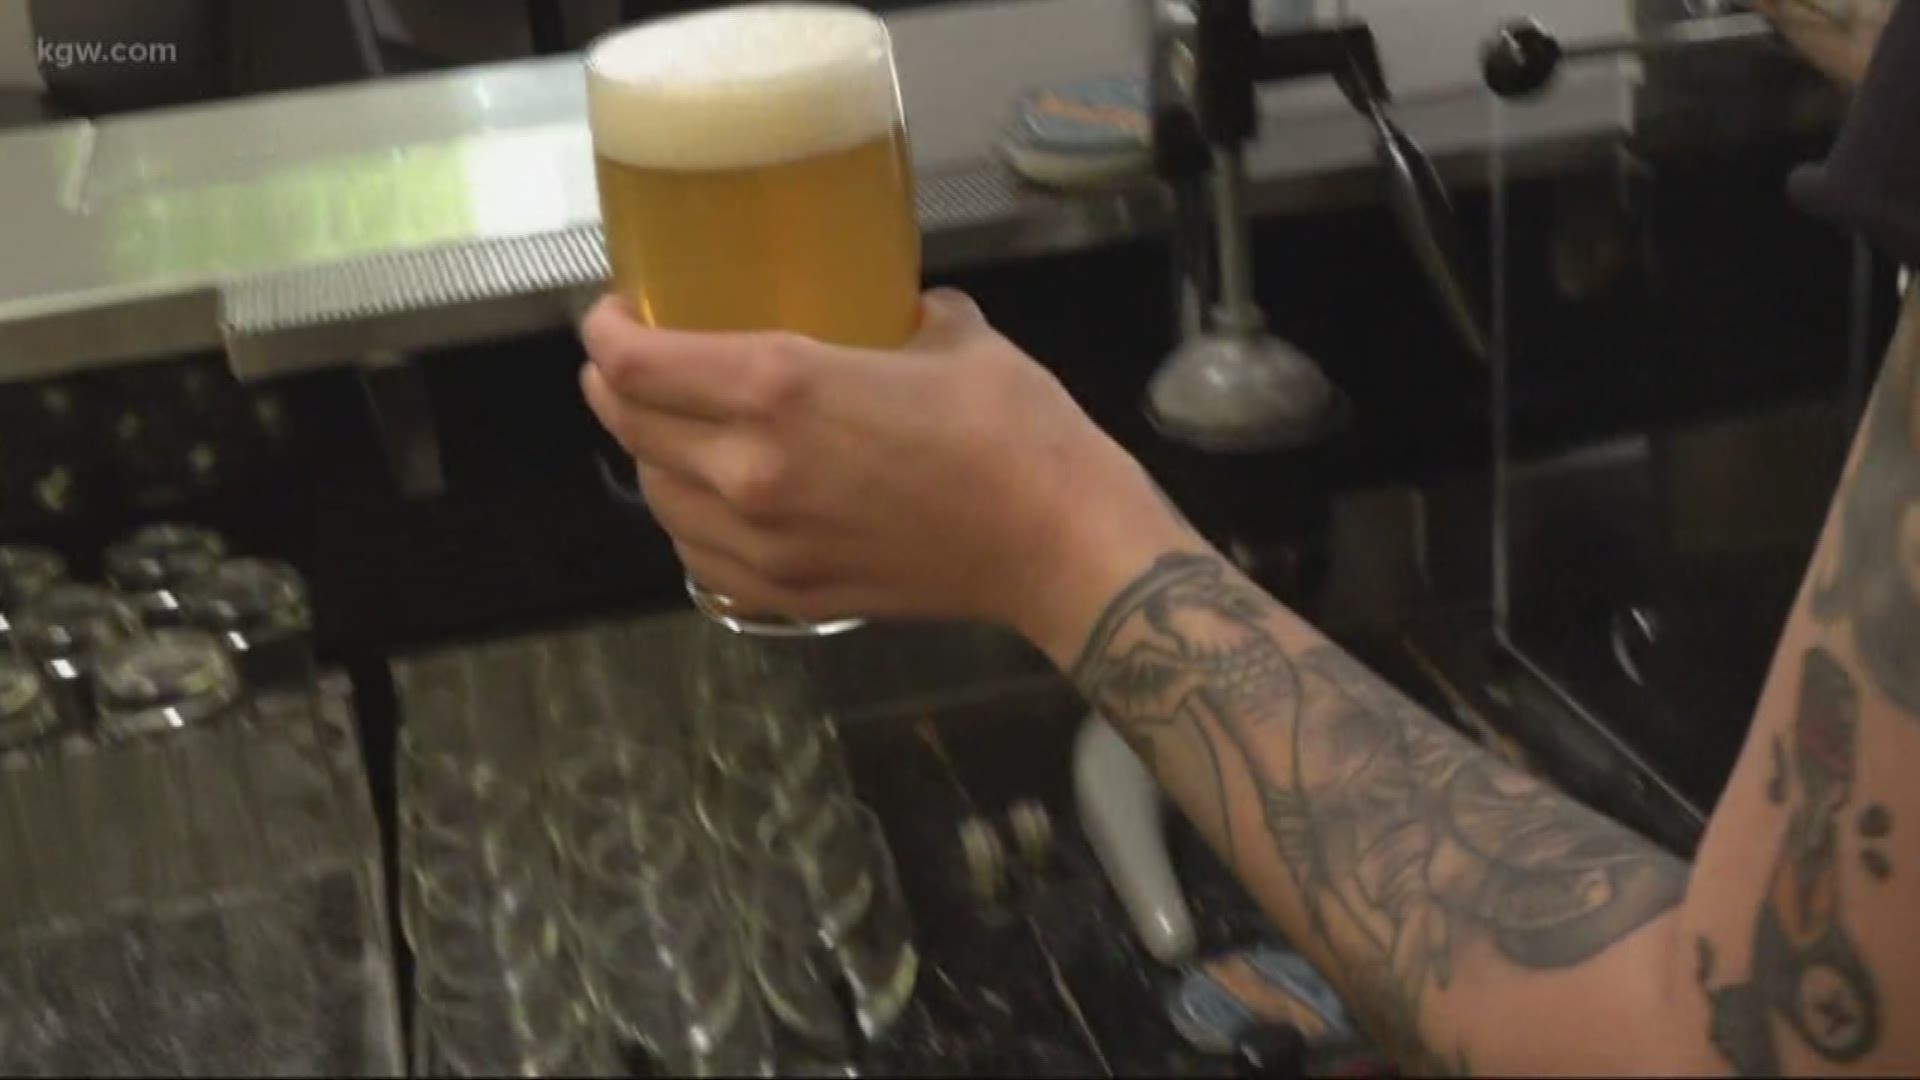 The beer industry is contributing billions to Oregon’s economy.